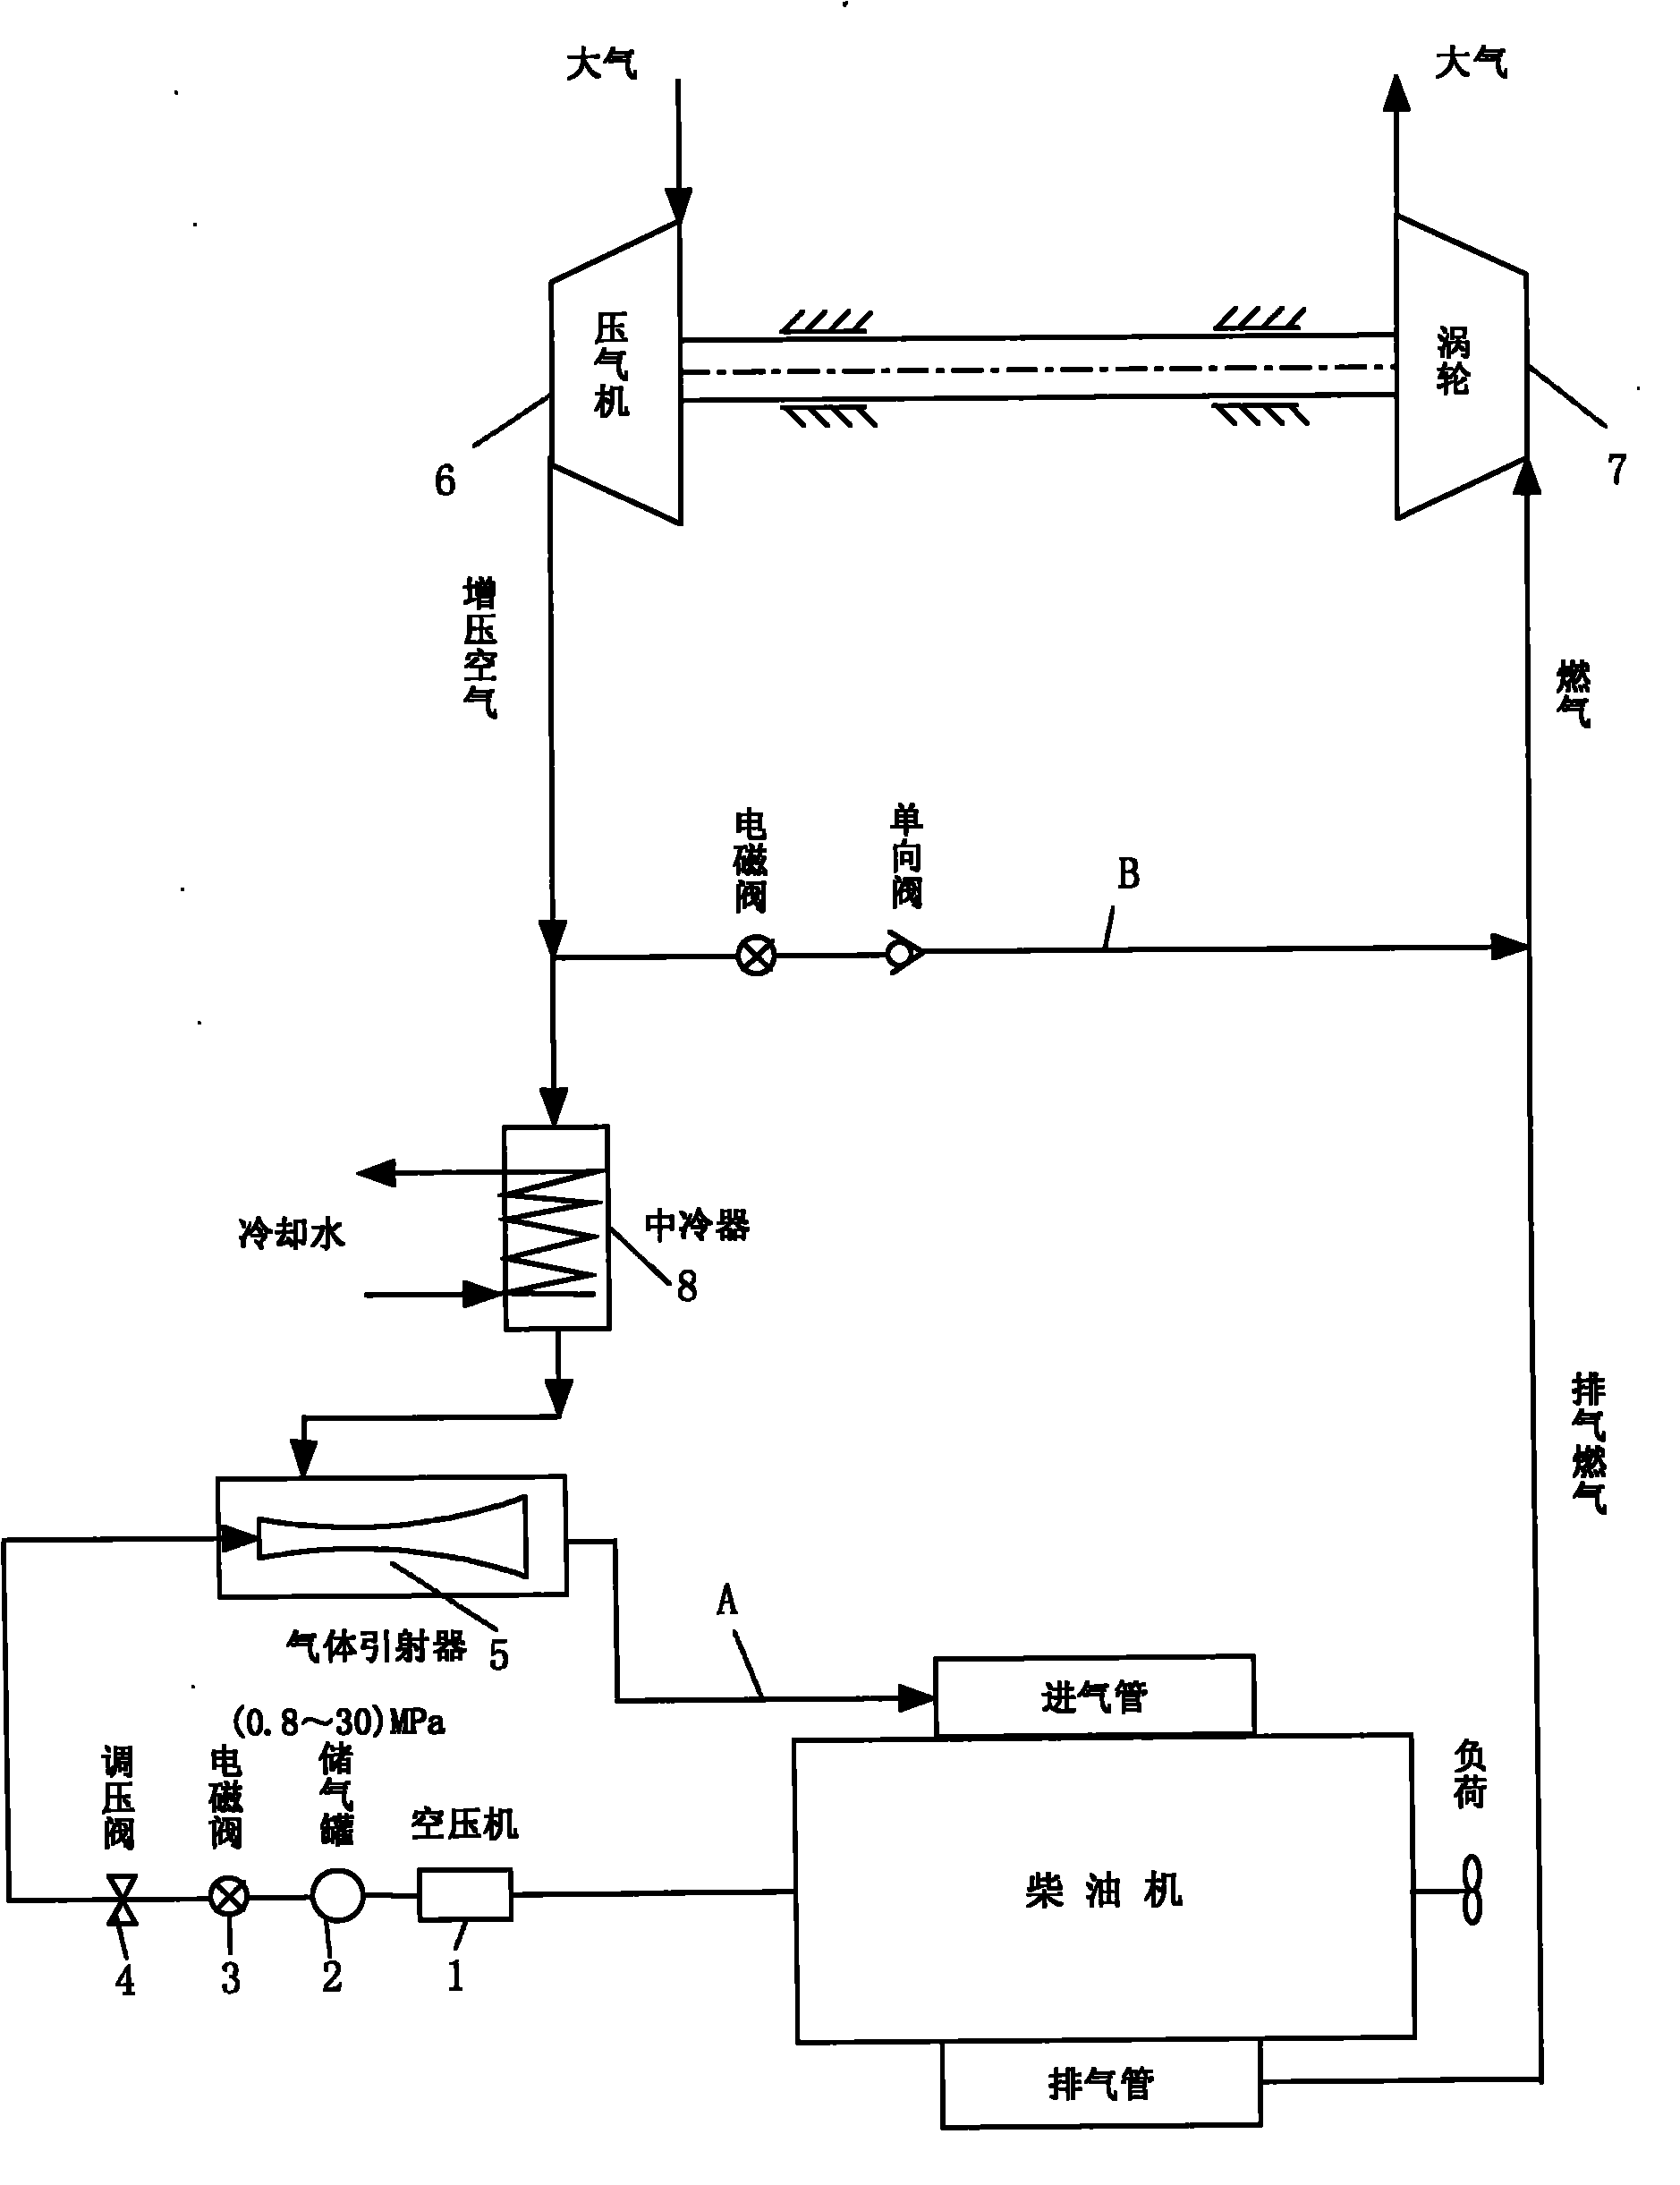 Injection/drainage air-supply turbocharging system